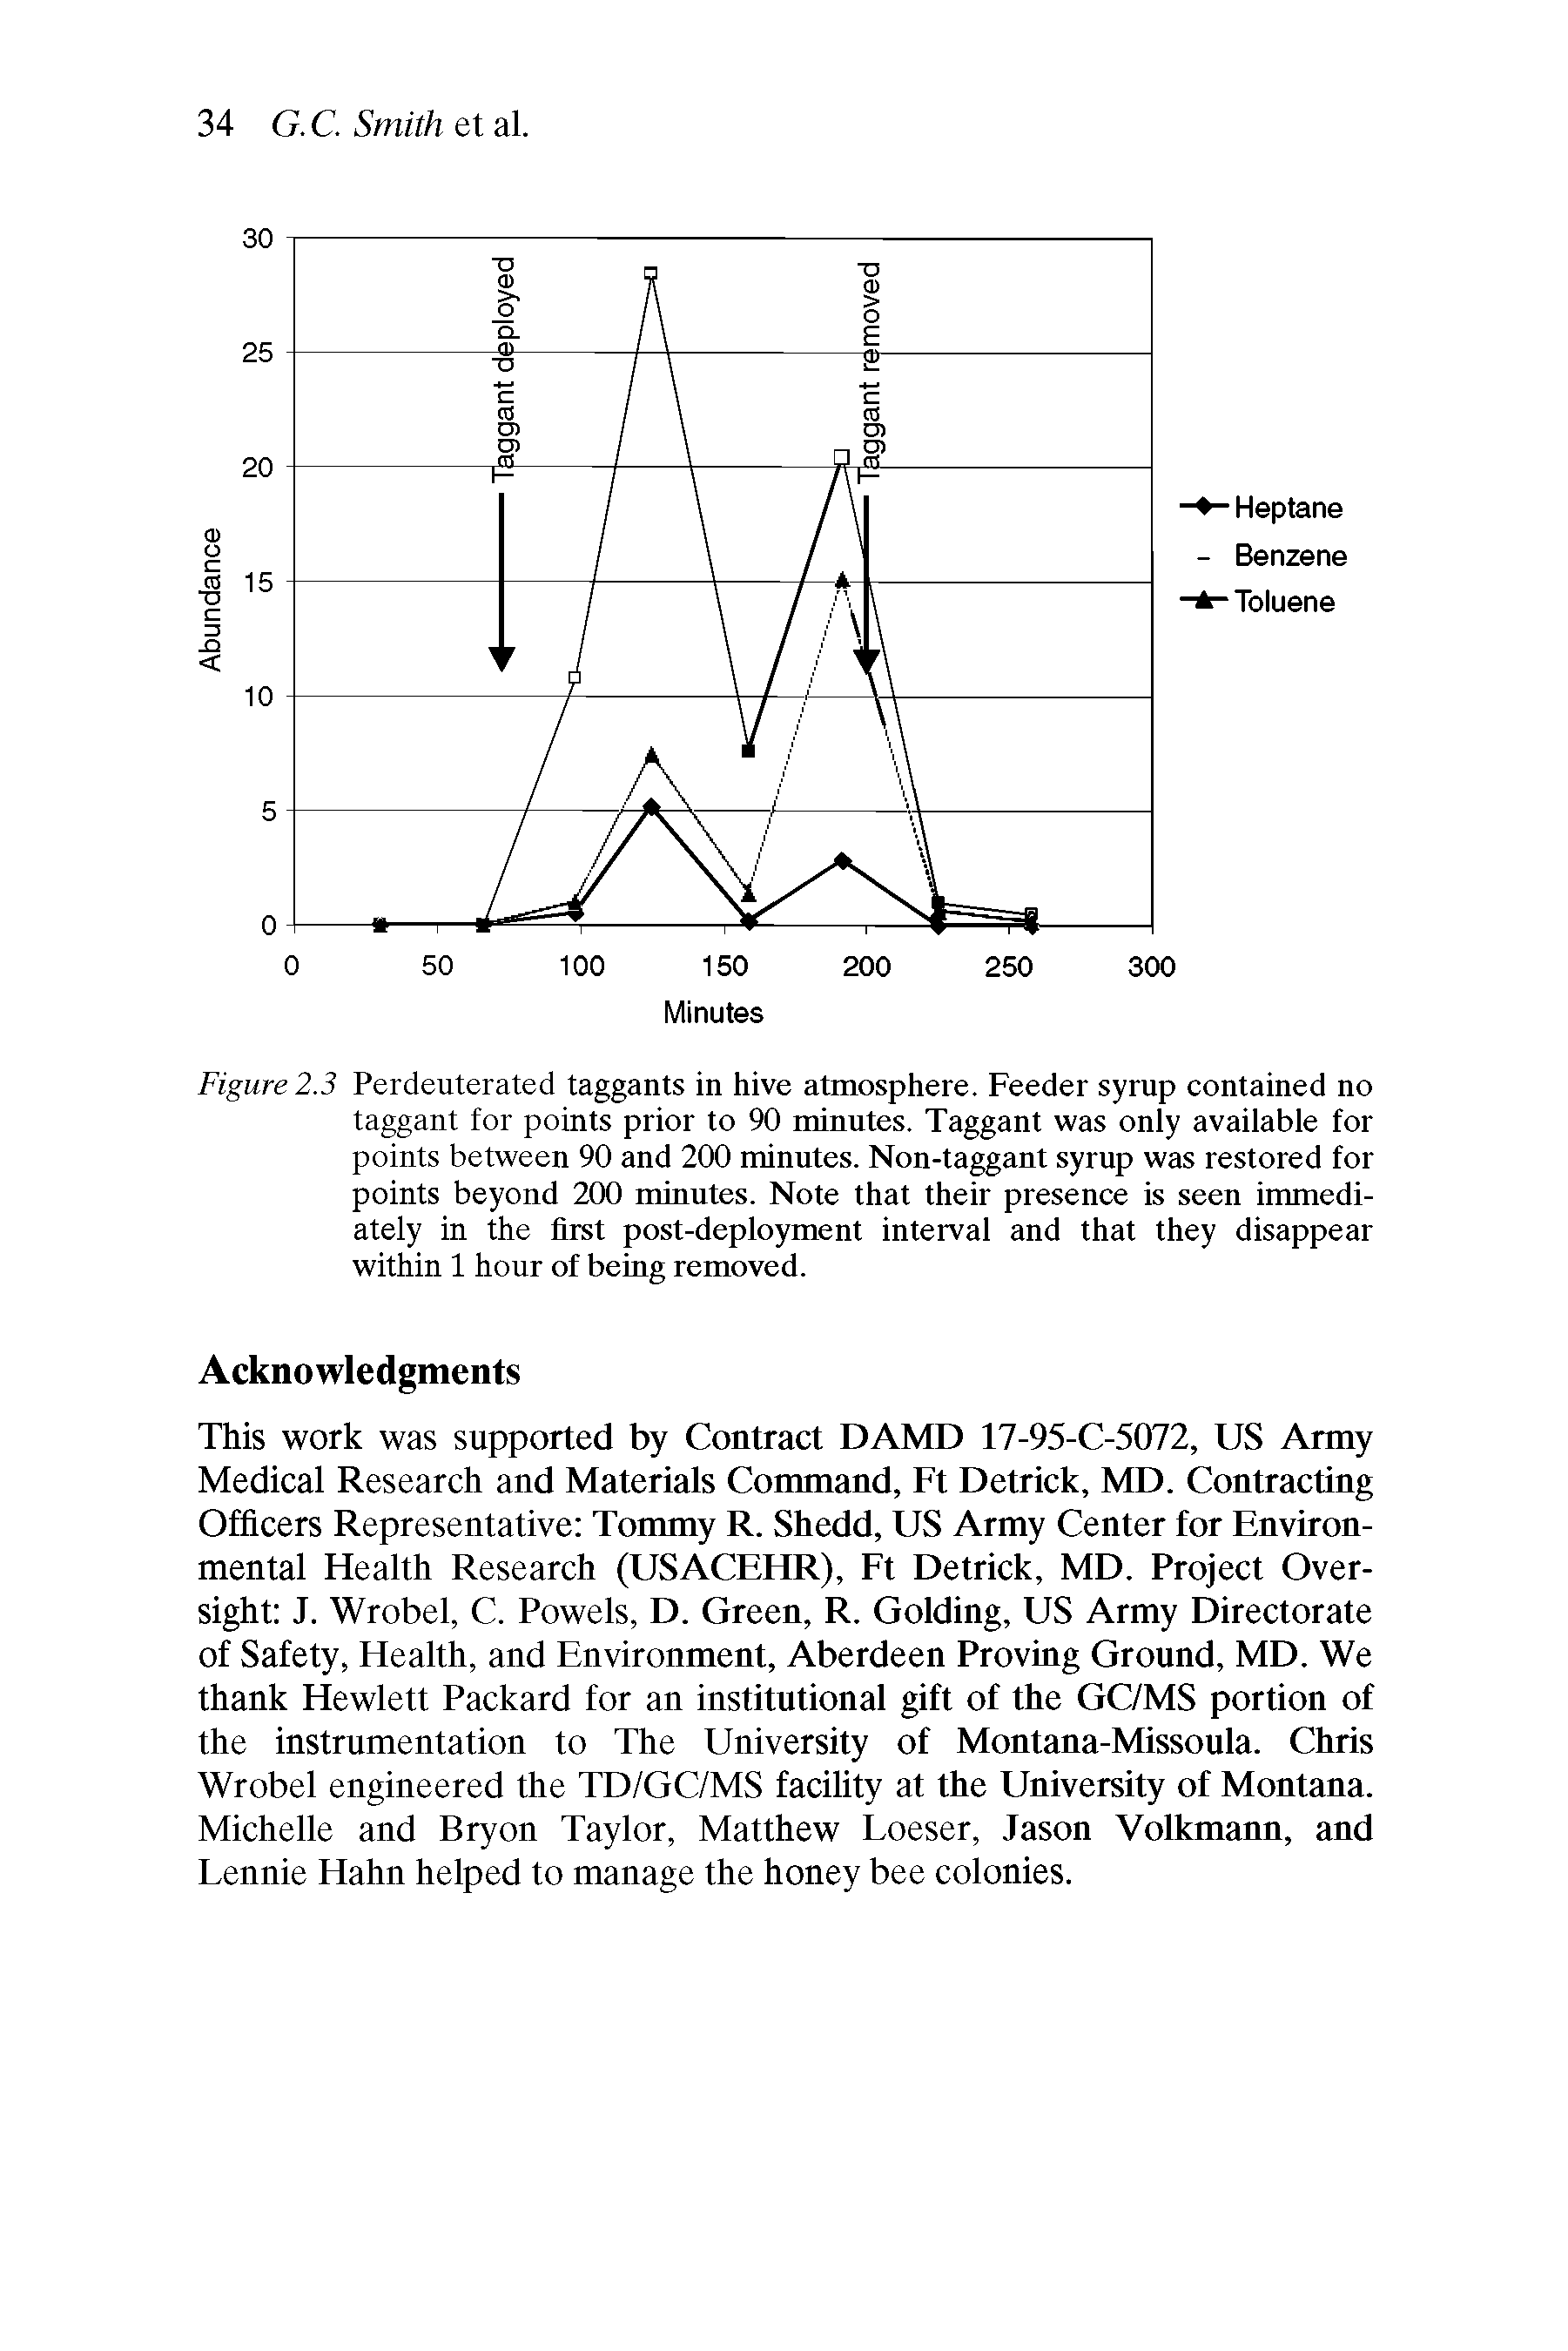 Figure 2.3 Perdeuterated taggants in hive atmosphere. Feeder syrup contained no taggant for points prior to 90 minutes. Taggant was only available for points between 90 and 200 minutes. Non-taggant syrup was restored for points beyond 200 minutes. Note that their presence is seen immediately in the first post-deployment interval and that they disappear within 1 hour of being removed.